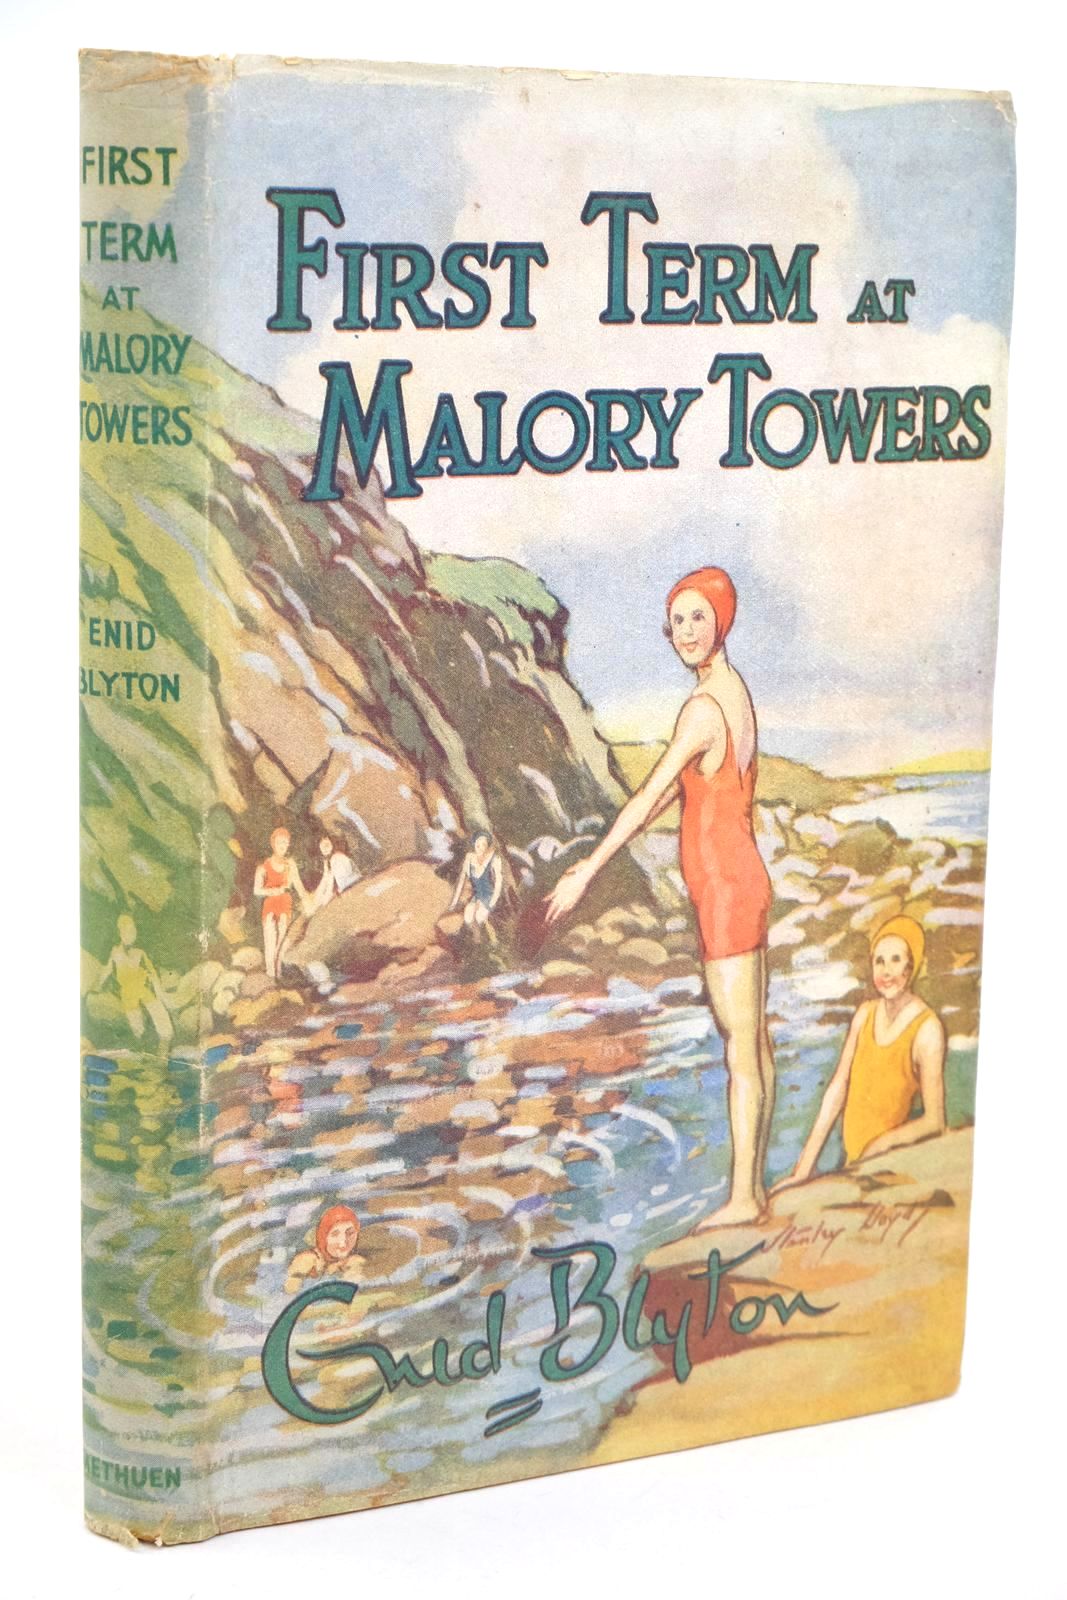 Photo of FIRST TERM AT MALORY TOWERS written by Blyton, Enid illustrated by Lloyd, Stanley published by Methuen & Co. Ltd. (STOCK CODE: 1322077)  for sale by Stella & Rose's Books